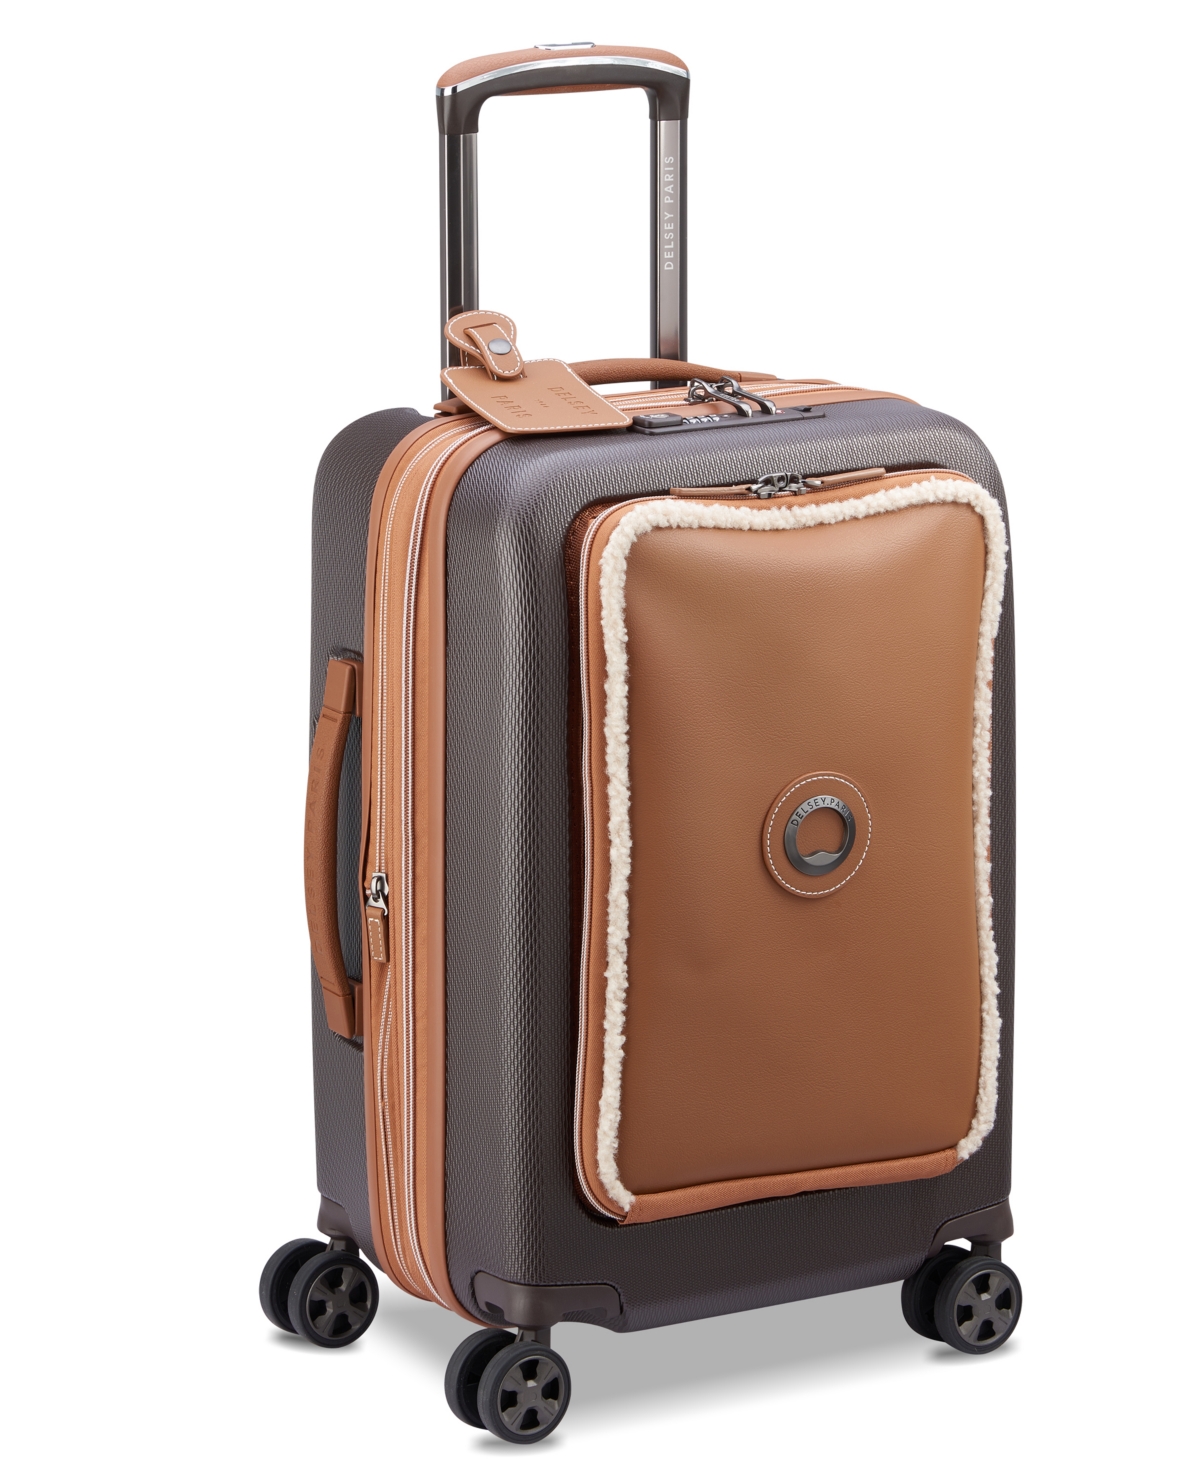 Delsey Chatelet Air 2.0 Fleece Pocket Carry-on In Chocolate